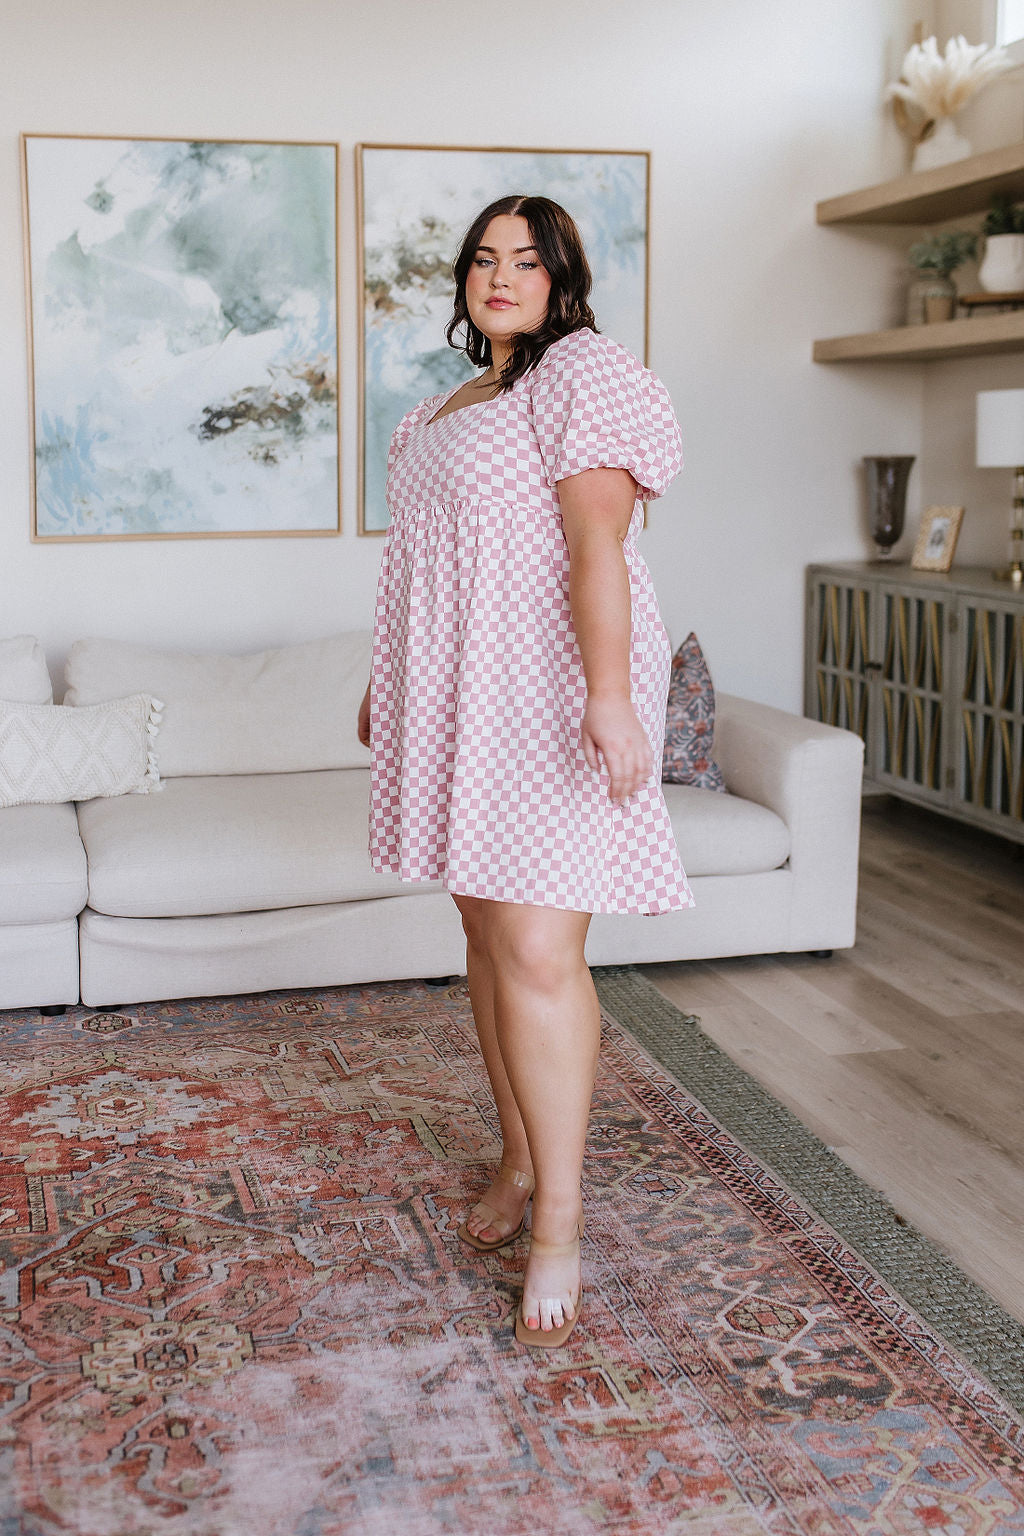 The Moment Checkered Babydoll Dress-Dresses-Inspired by Justeen-Women's Clothing Boutique in Chicago, Illinois